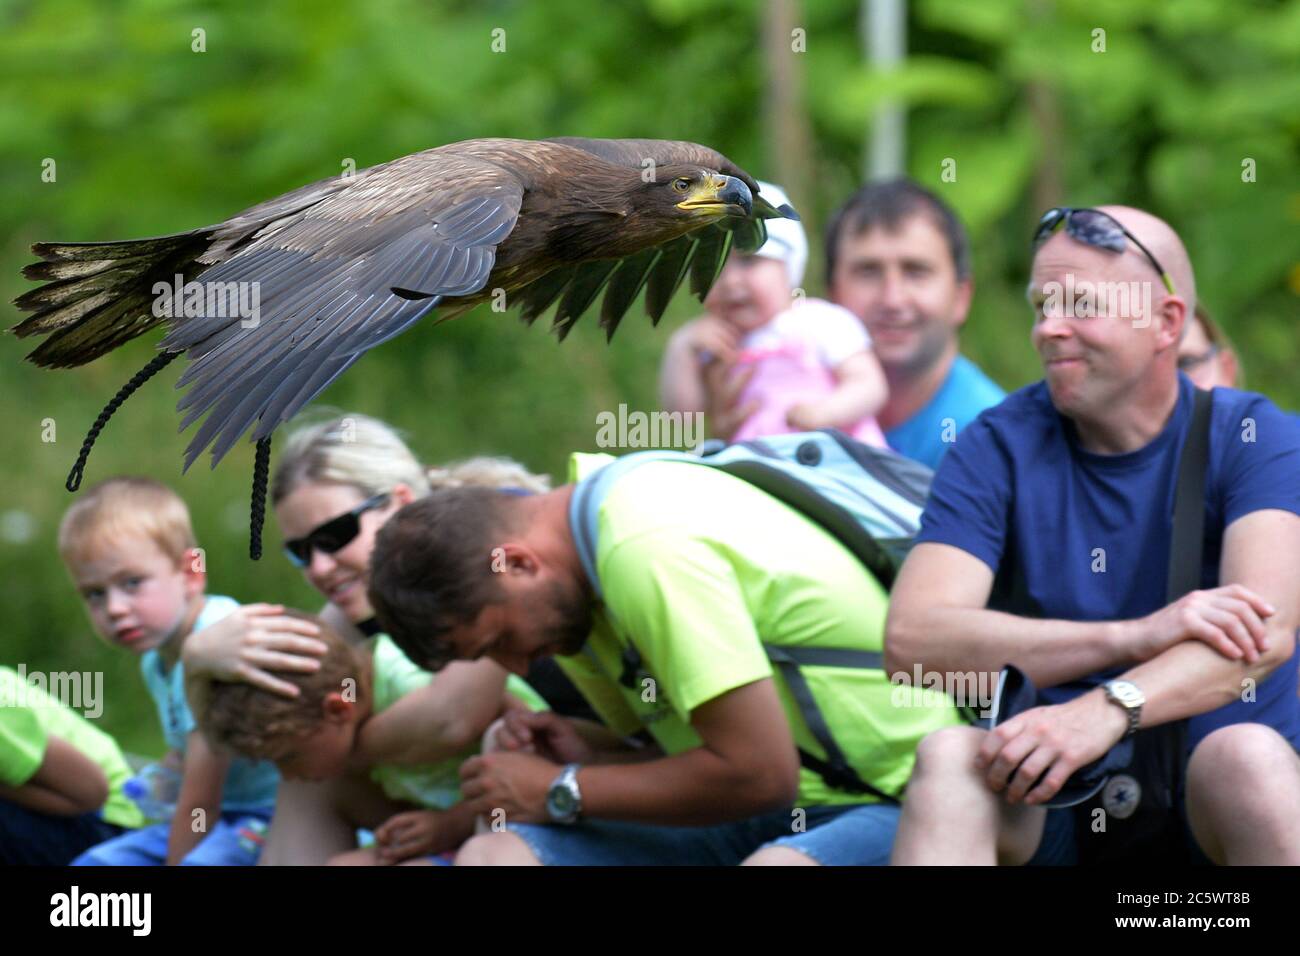 Jihlava, Czech Republic. 5th July, 2020. Falconer Eduard Skaloud presents birds of prey to zoo visitors. Located at the Jihlava Zoo, you can come face to face with the magnificent bald eagle and beautiful owls. During the day you can experience one of the most exciting ''Birds of Prey'' displays in the Czech Repubic. Credit: Slavek Ruta/ZUMA Wire/Alamy Live News Stock Photo